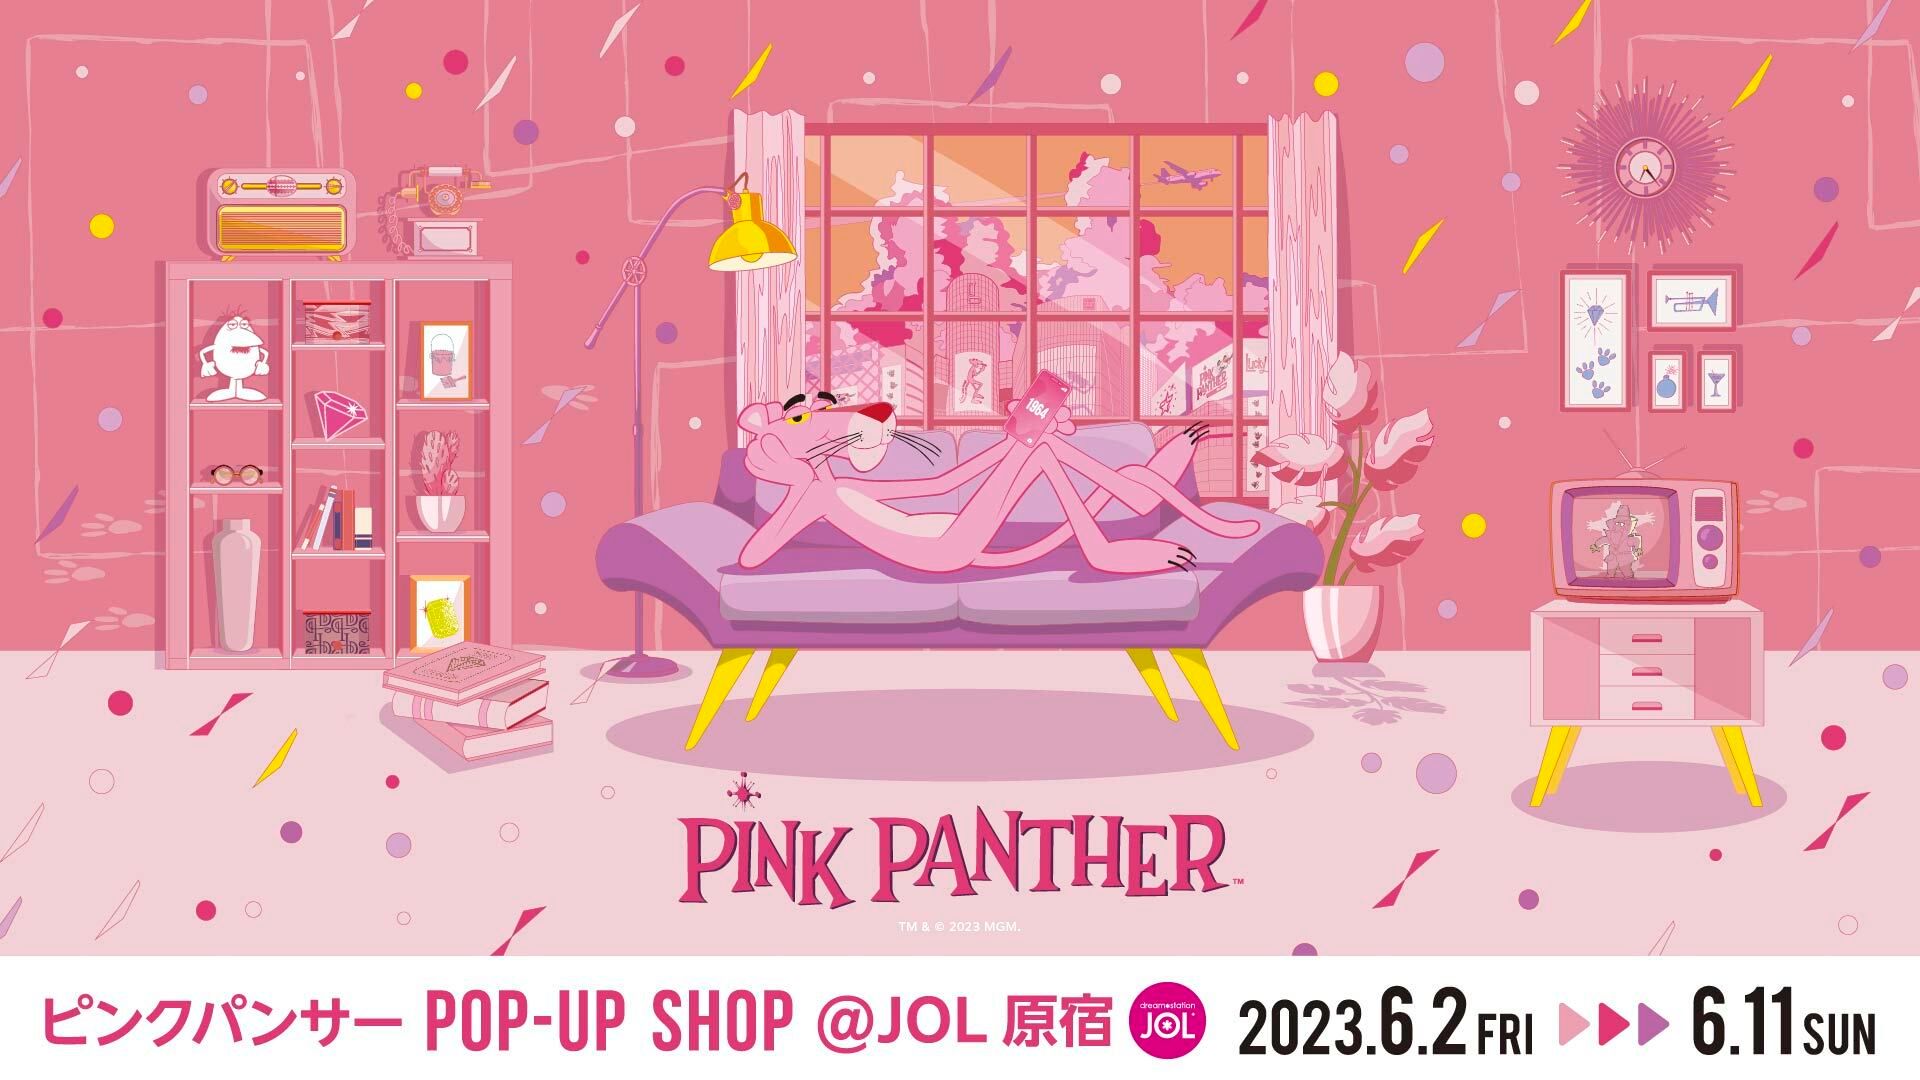 THE PINK PANTHER TM & © 1964 – 2023 Metro-Goldwyn-Mayer Studios Inc. All Rights Reserved.